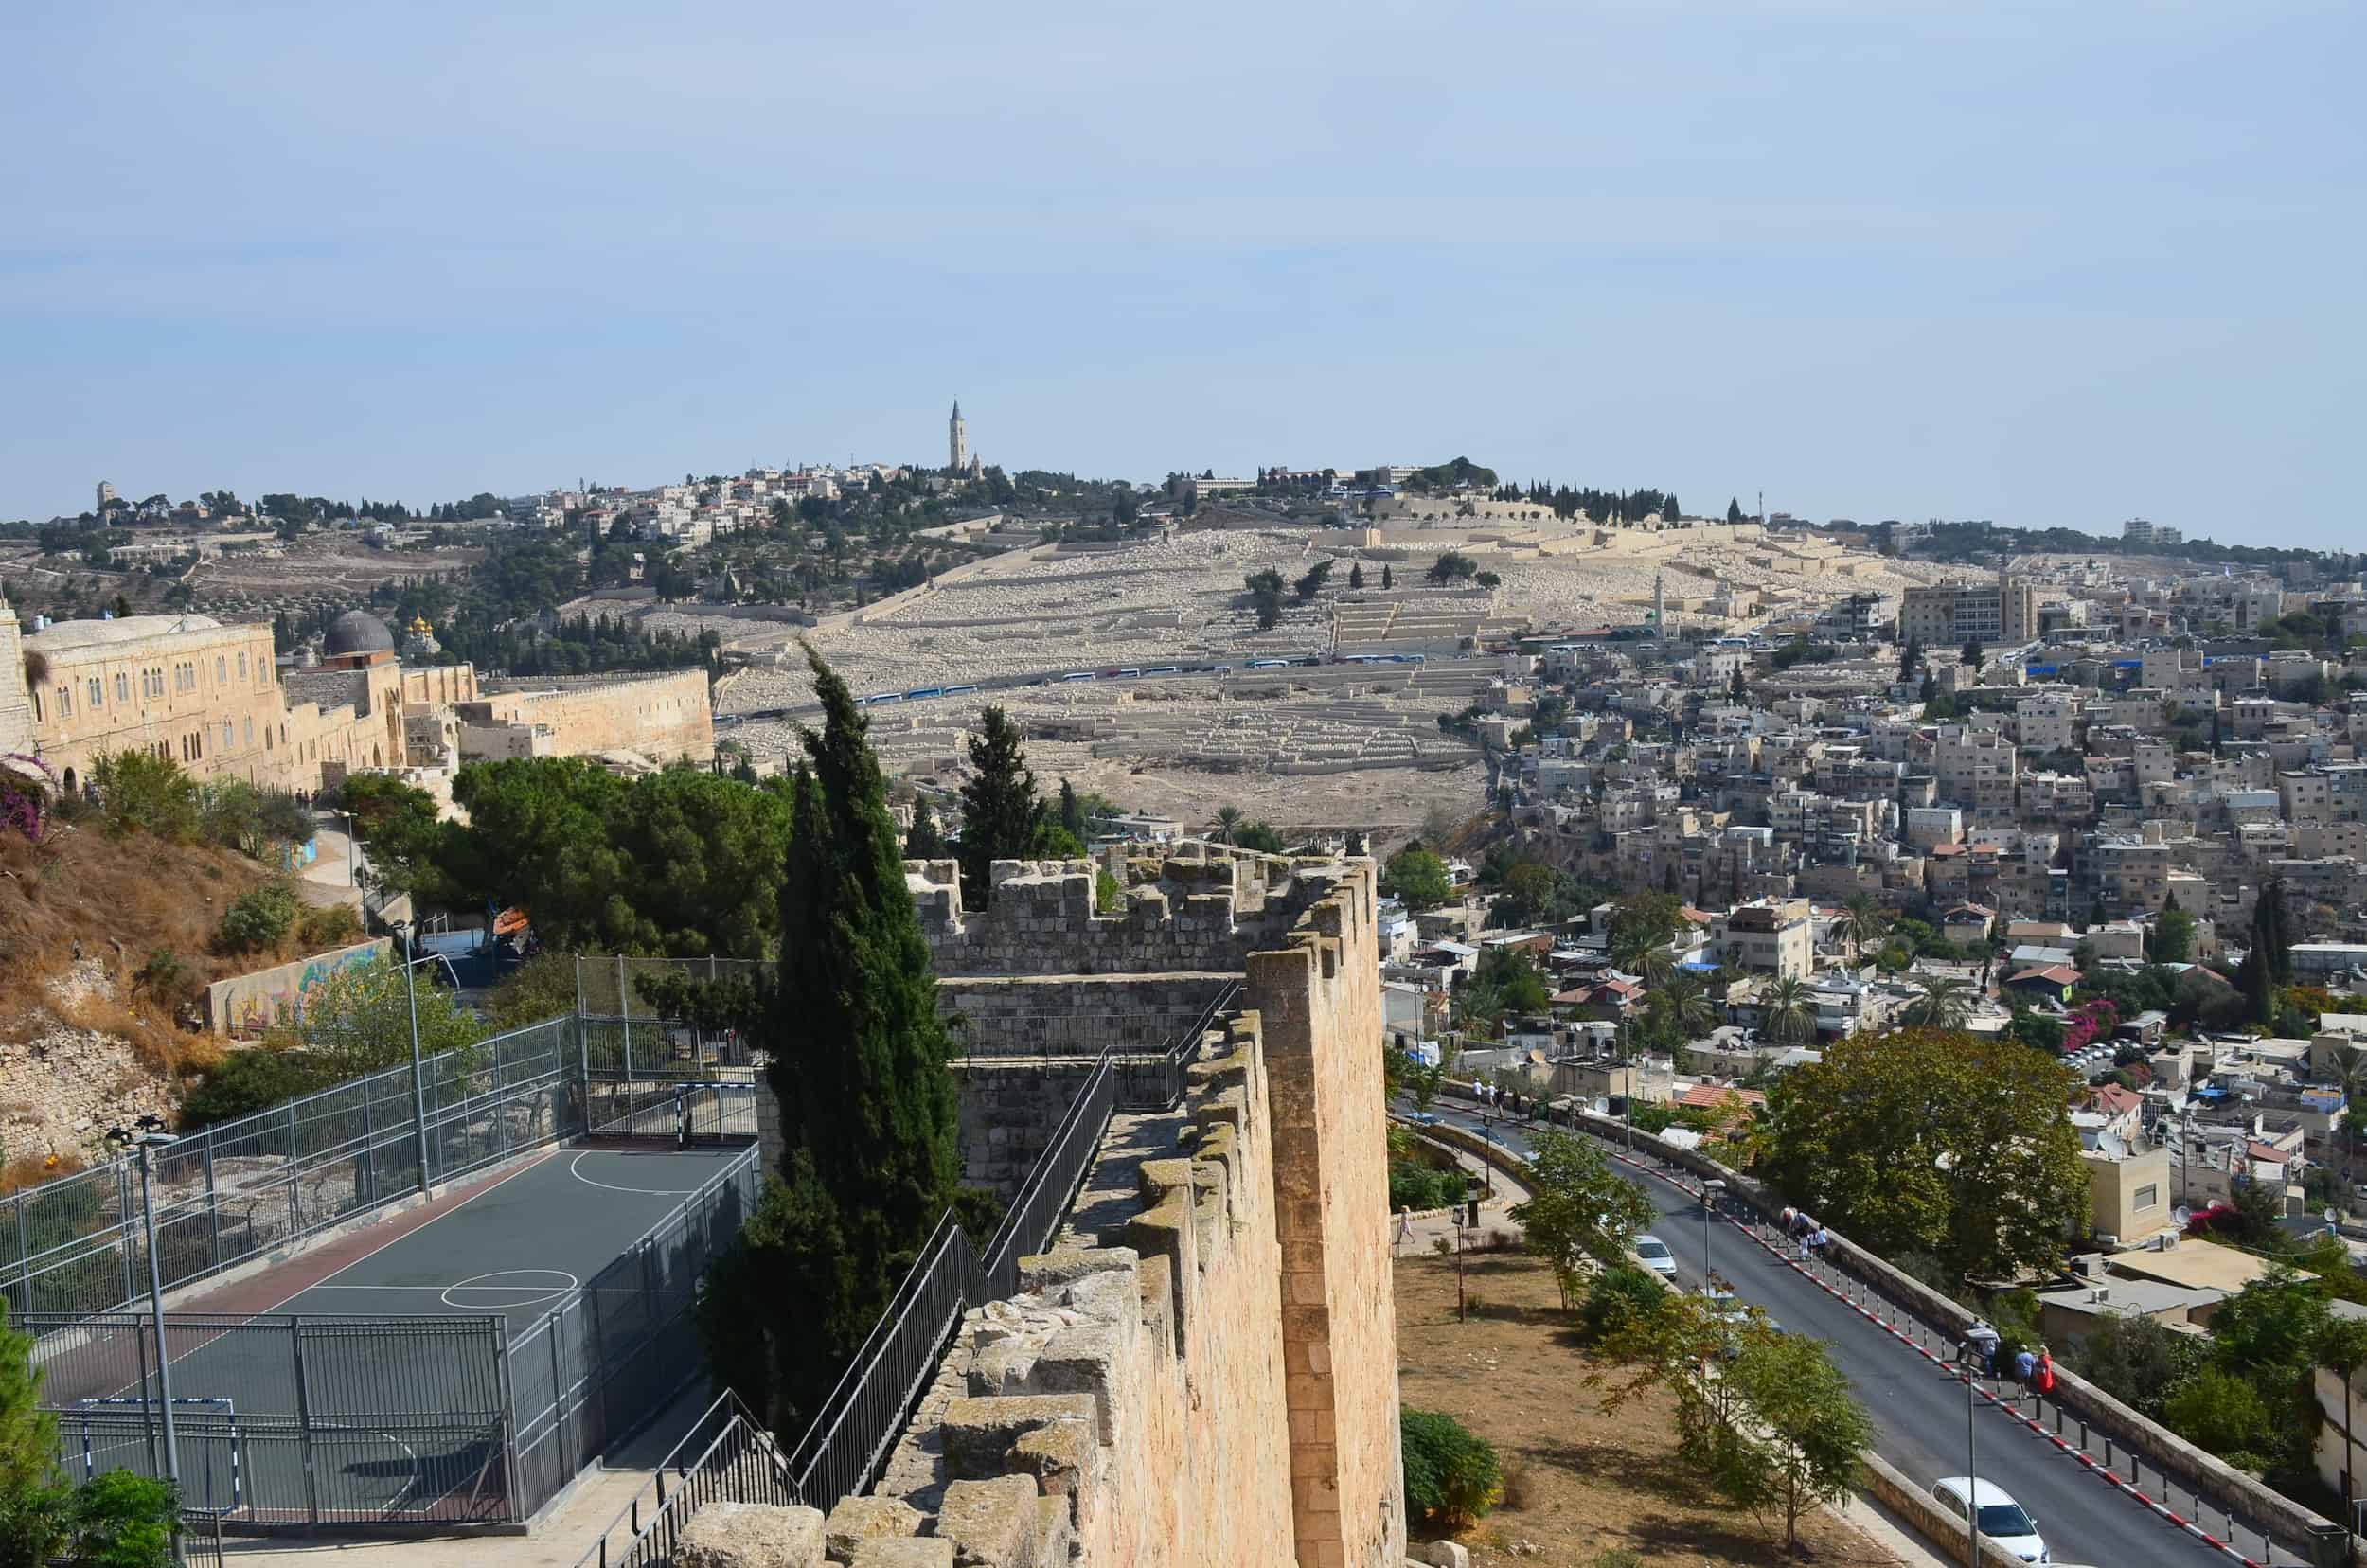 Looking towards the Mount of Olives on the southern route of the Ramparts Walk in Jerusalem